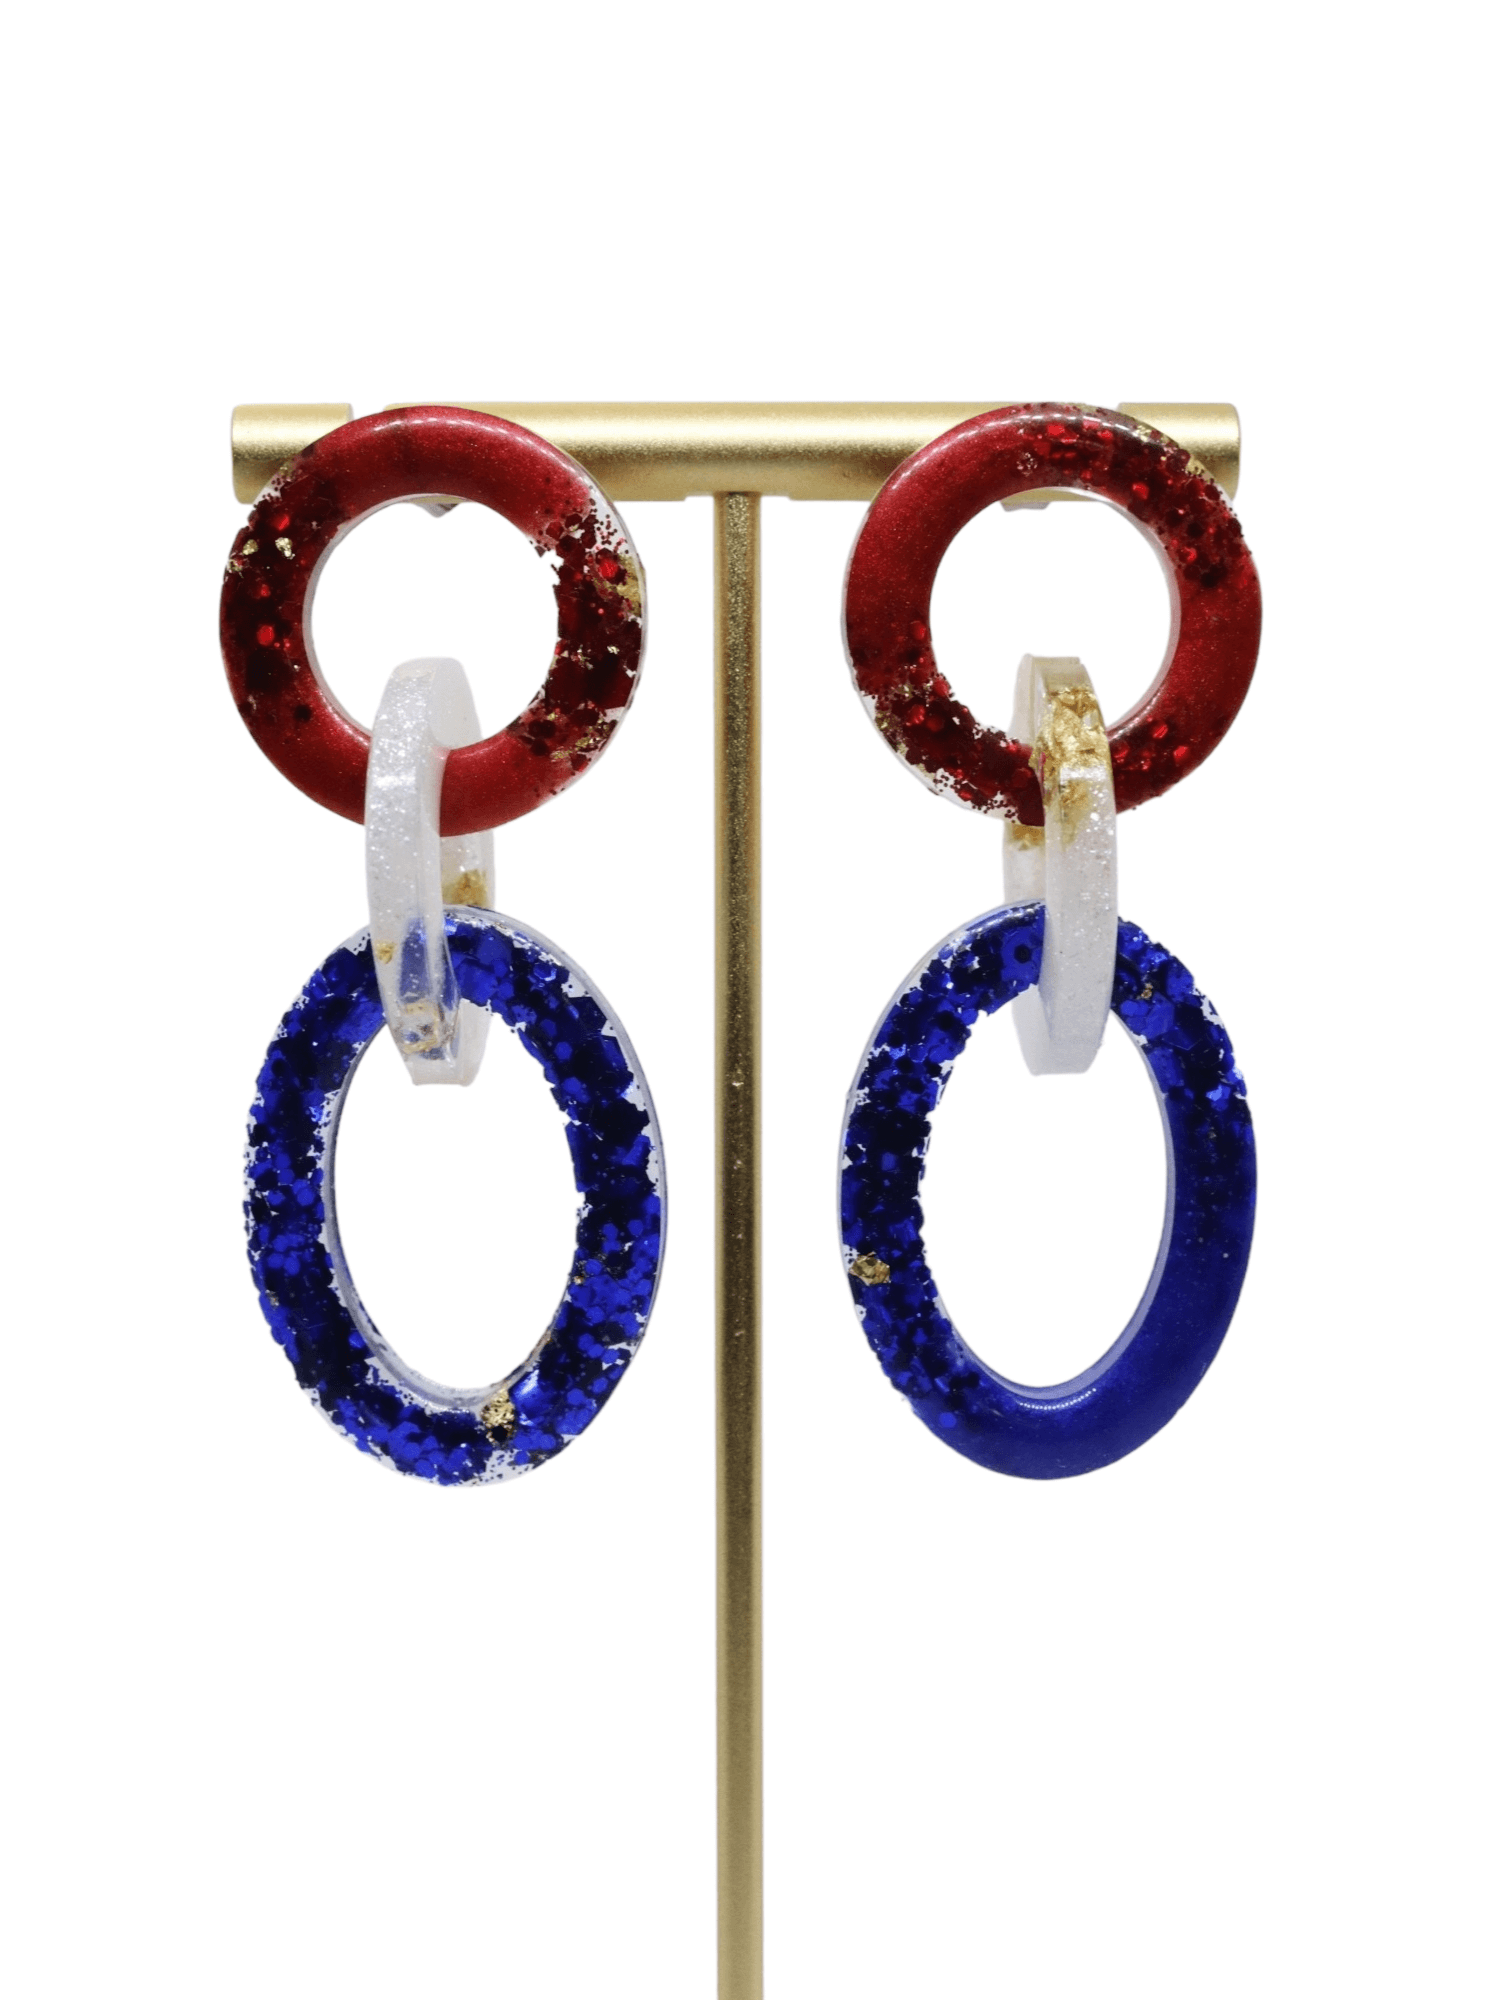 glittery-patriotic-link-earrings---red-white-and-blue-hypoallergenic-earrings---patriotic-glittery-earrings---kaleidoscopes-and-polka-dots